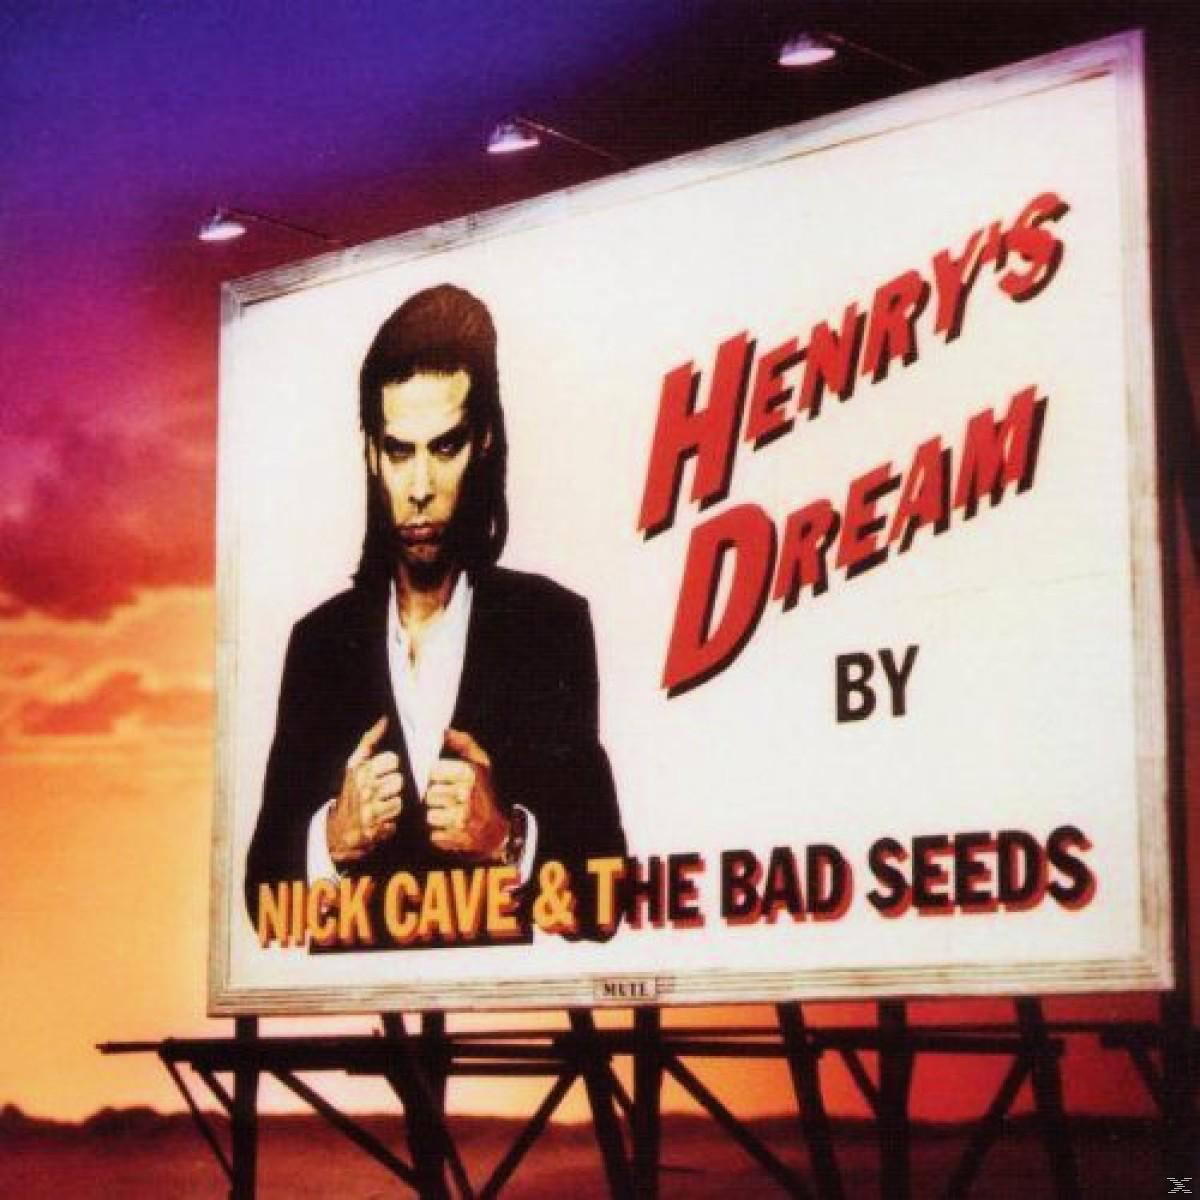 Bad (Vinyl) The Seeds - Nick Cave Henry\'s - & Dream